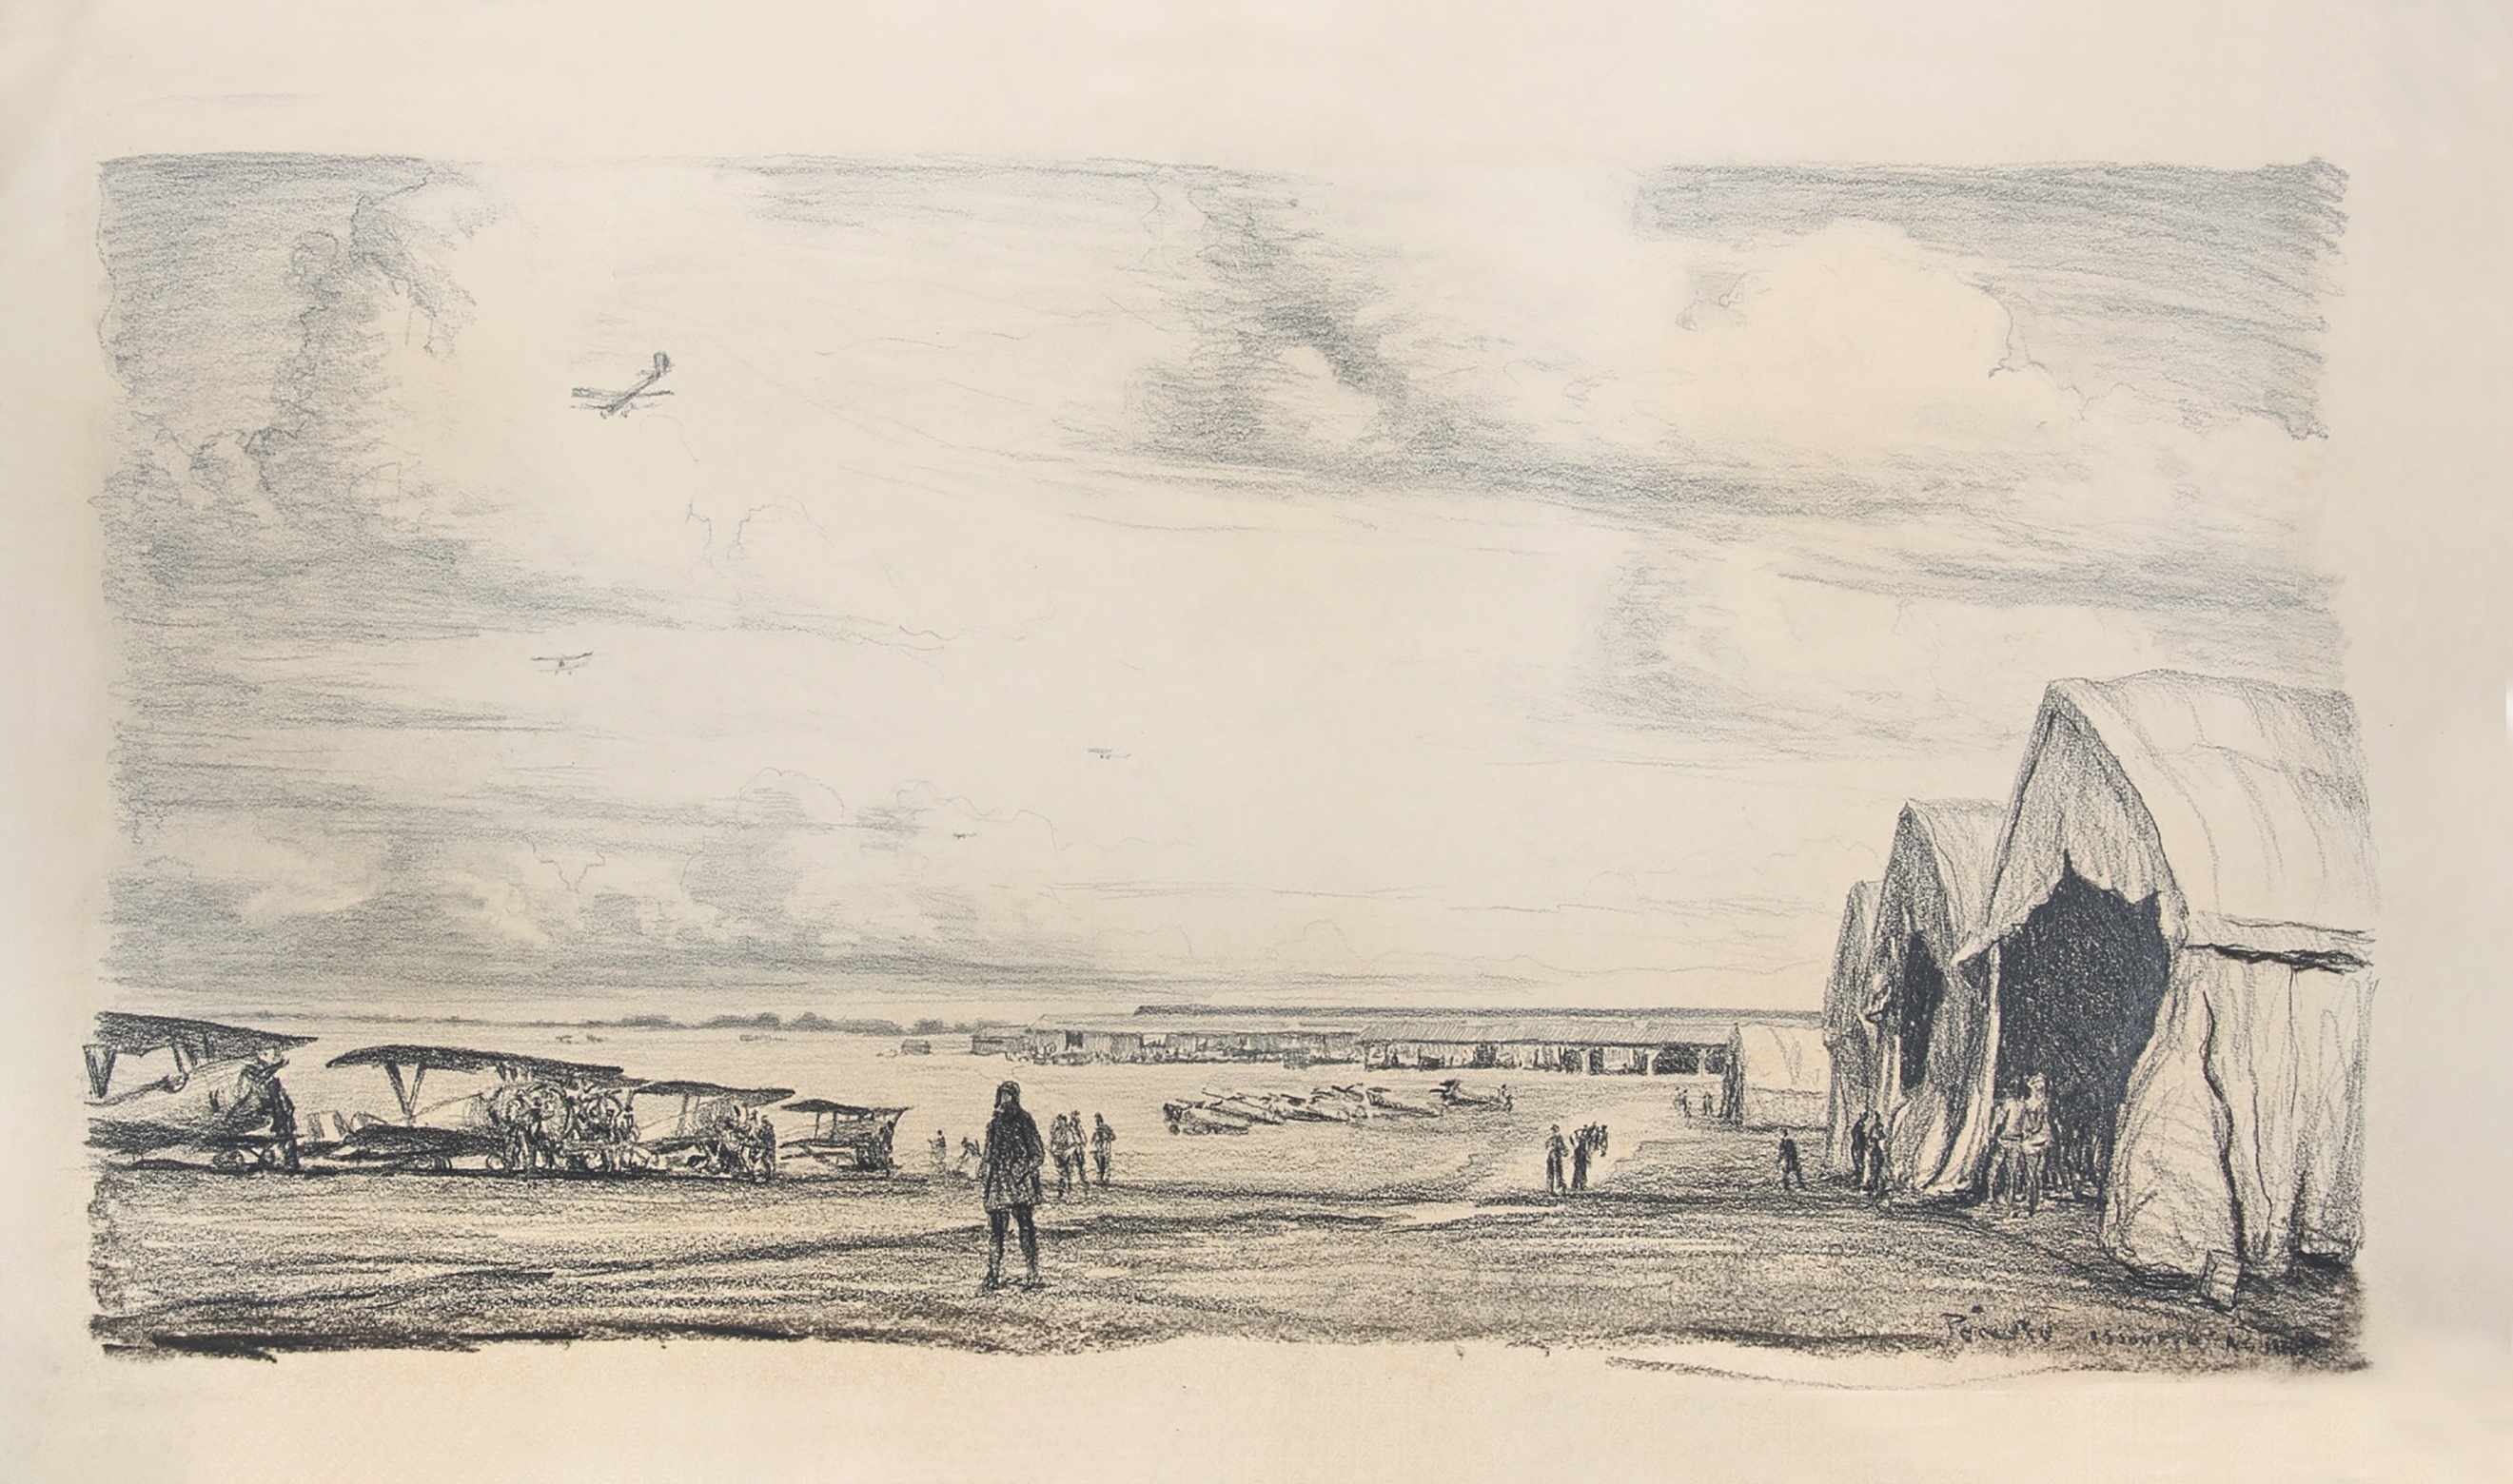 Ernest Peixotto’s sketch of the U.S. Air Service’s 3rd Aviation Instruction Center at Issoudun, France. (National Museum of American History, Smithsonian Institution)